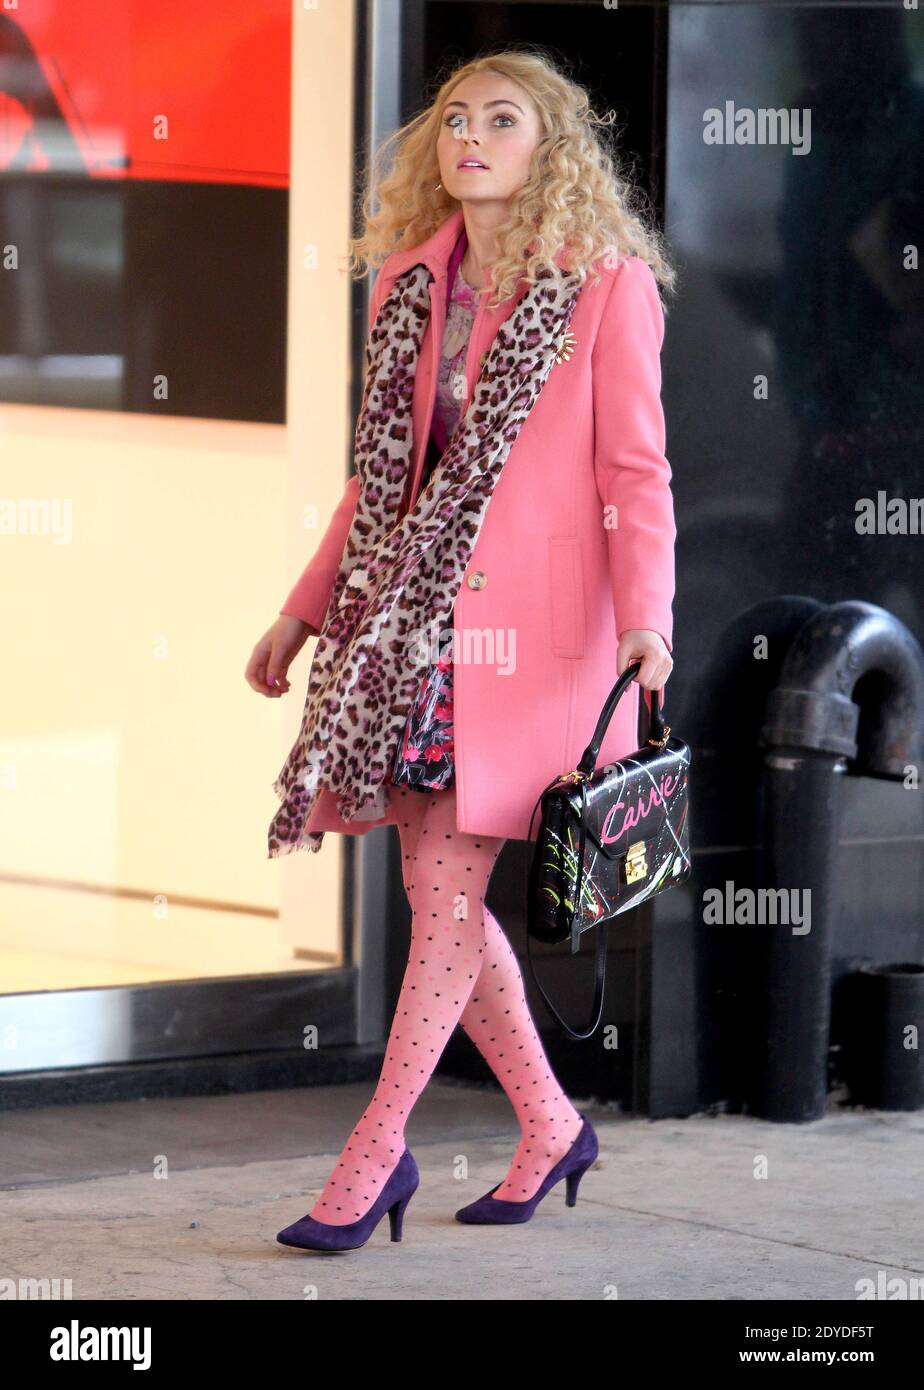 U.S actress AnnaSophia Robb films a scene on her TV series 'The Carrie Dairies' then during a break she shops at Paige store near the set in The Meat Packing District, New York City, NY, USA on February 6, 2013. Photo by Charles Guerin/ABACAPRESS.COM Stock Photo